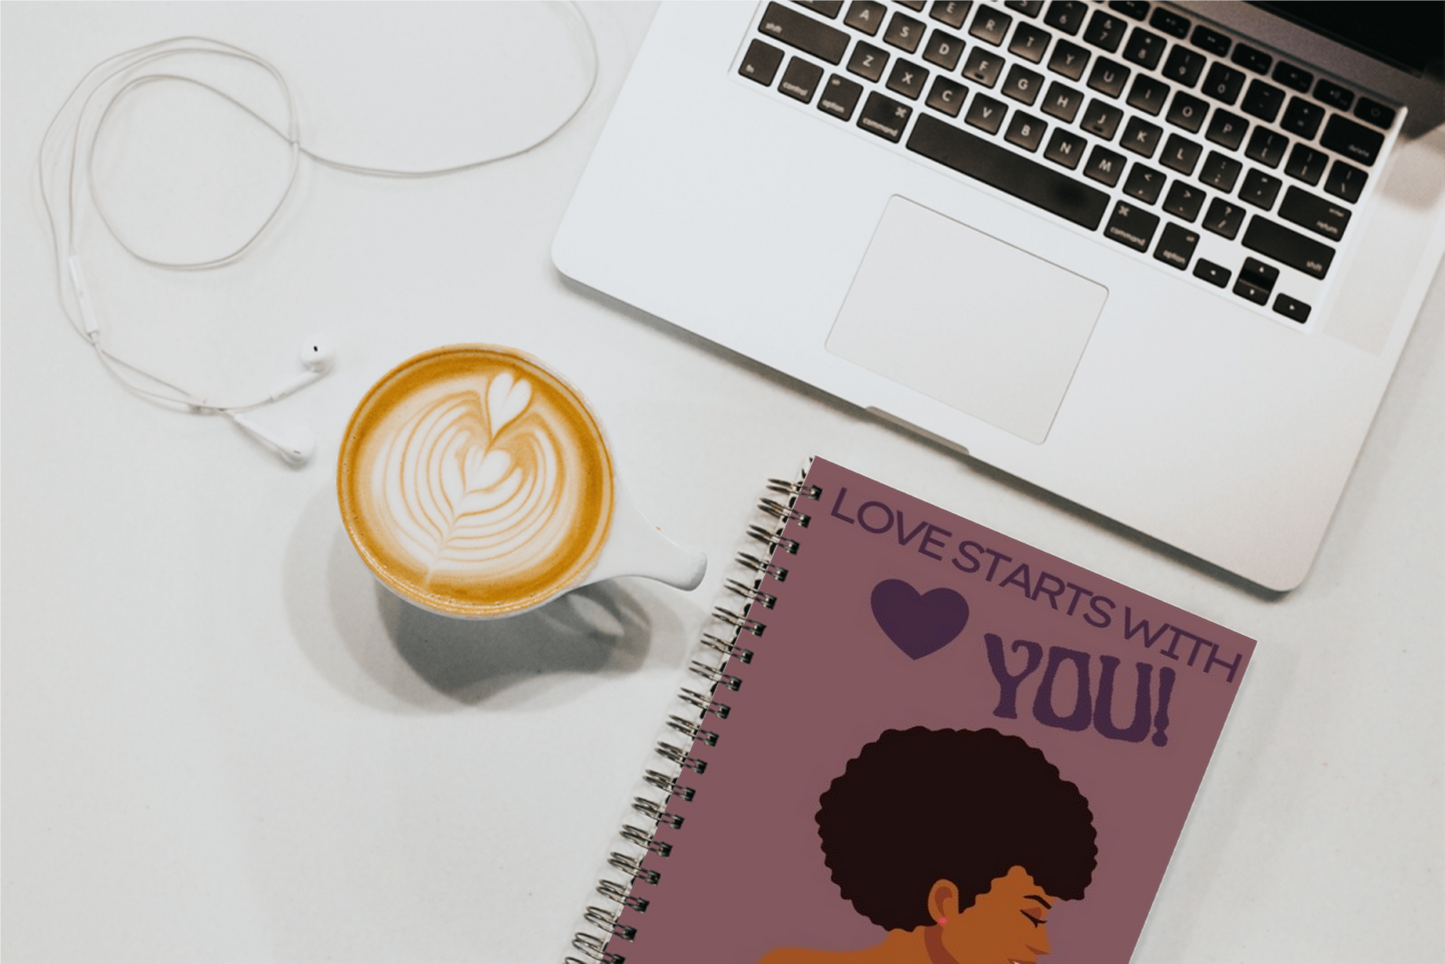 60 Day Refresh Planner! Love Starts With You. (Afro)